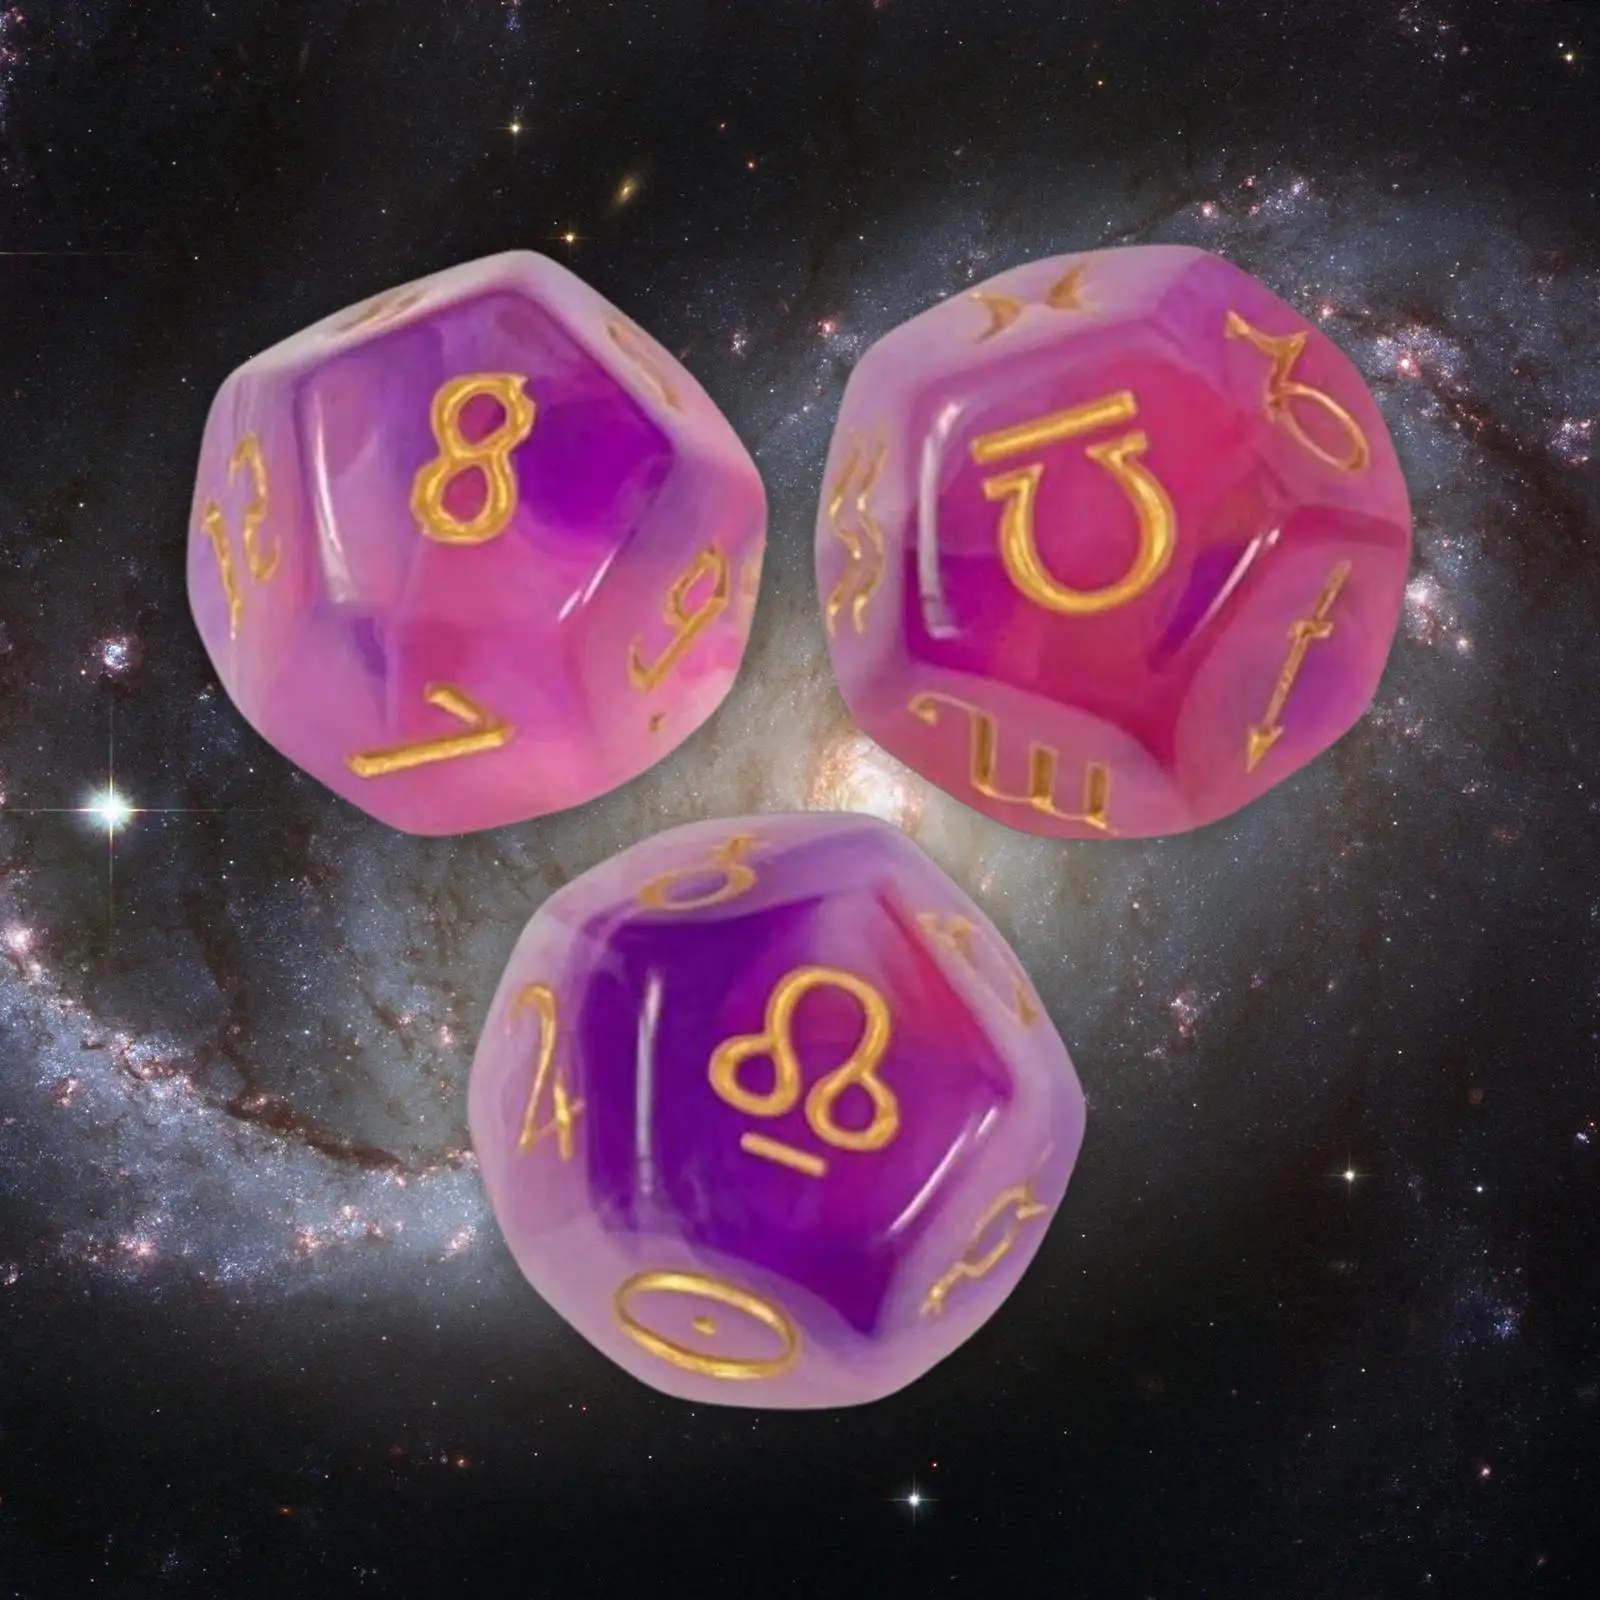 3 Pieces Astrology Divination Dice Zodiac Astrology Planets Dice Set for Constellation Toy Role Playing Game Tarot Divination